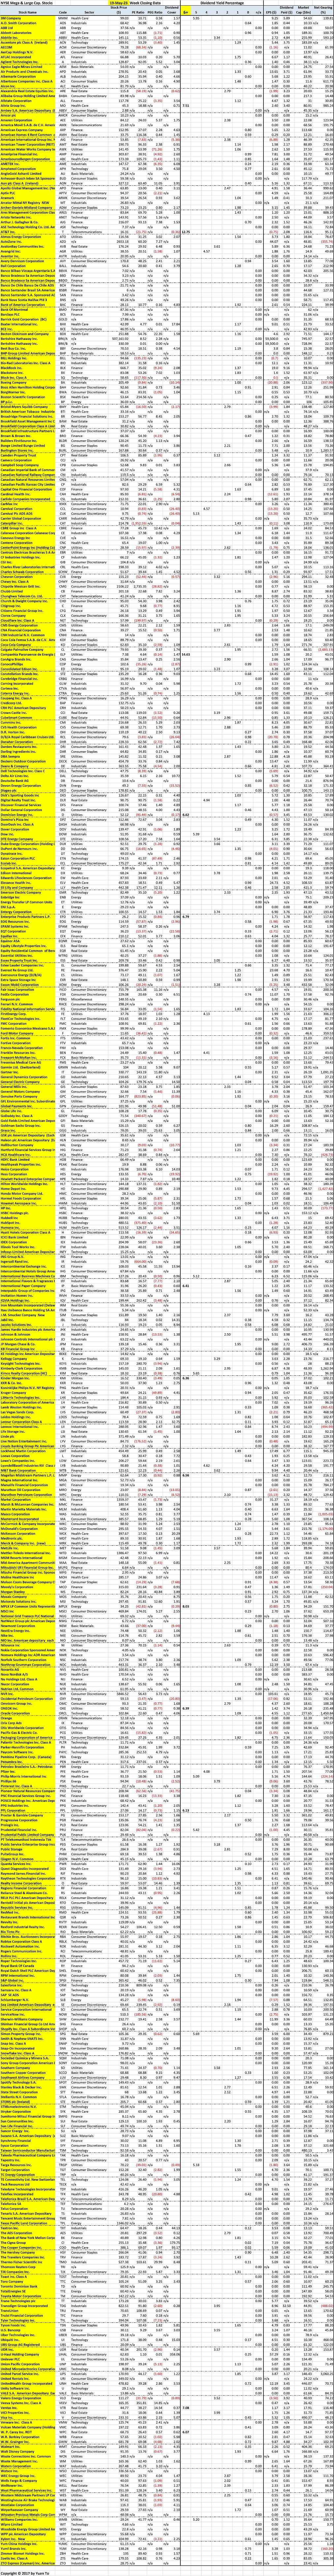 NYSE Mega and Large Stocks Sorted by Stock Name for Reference and Lookup